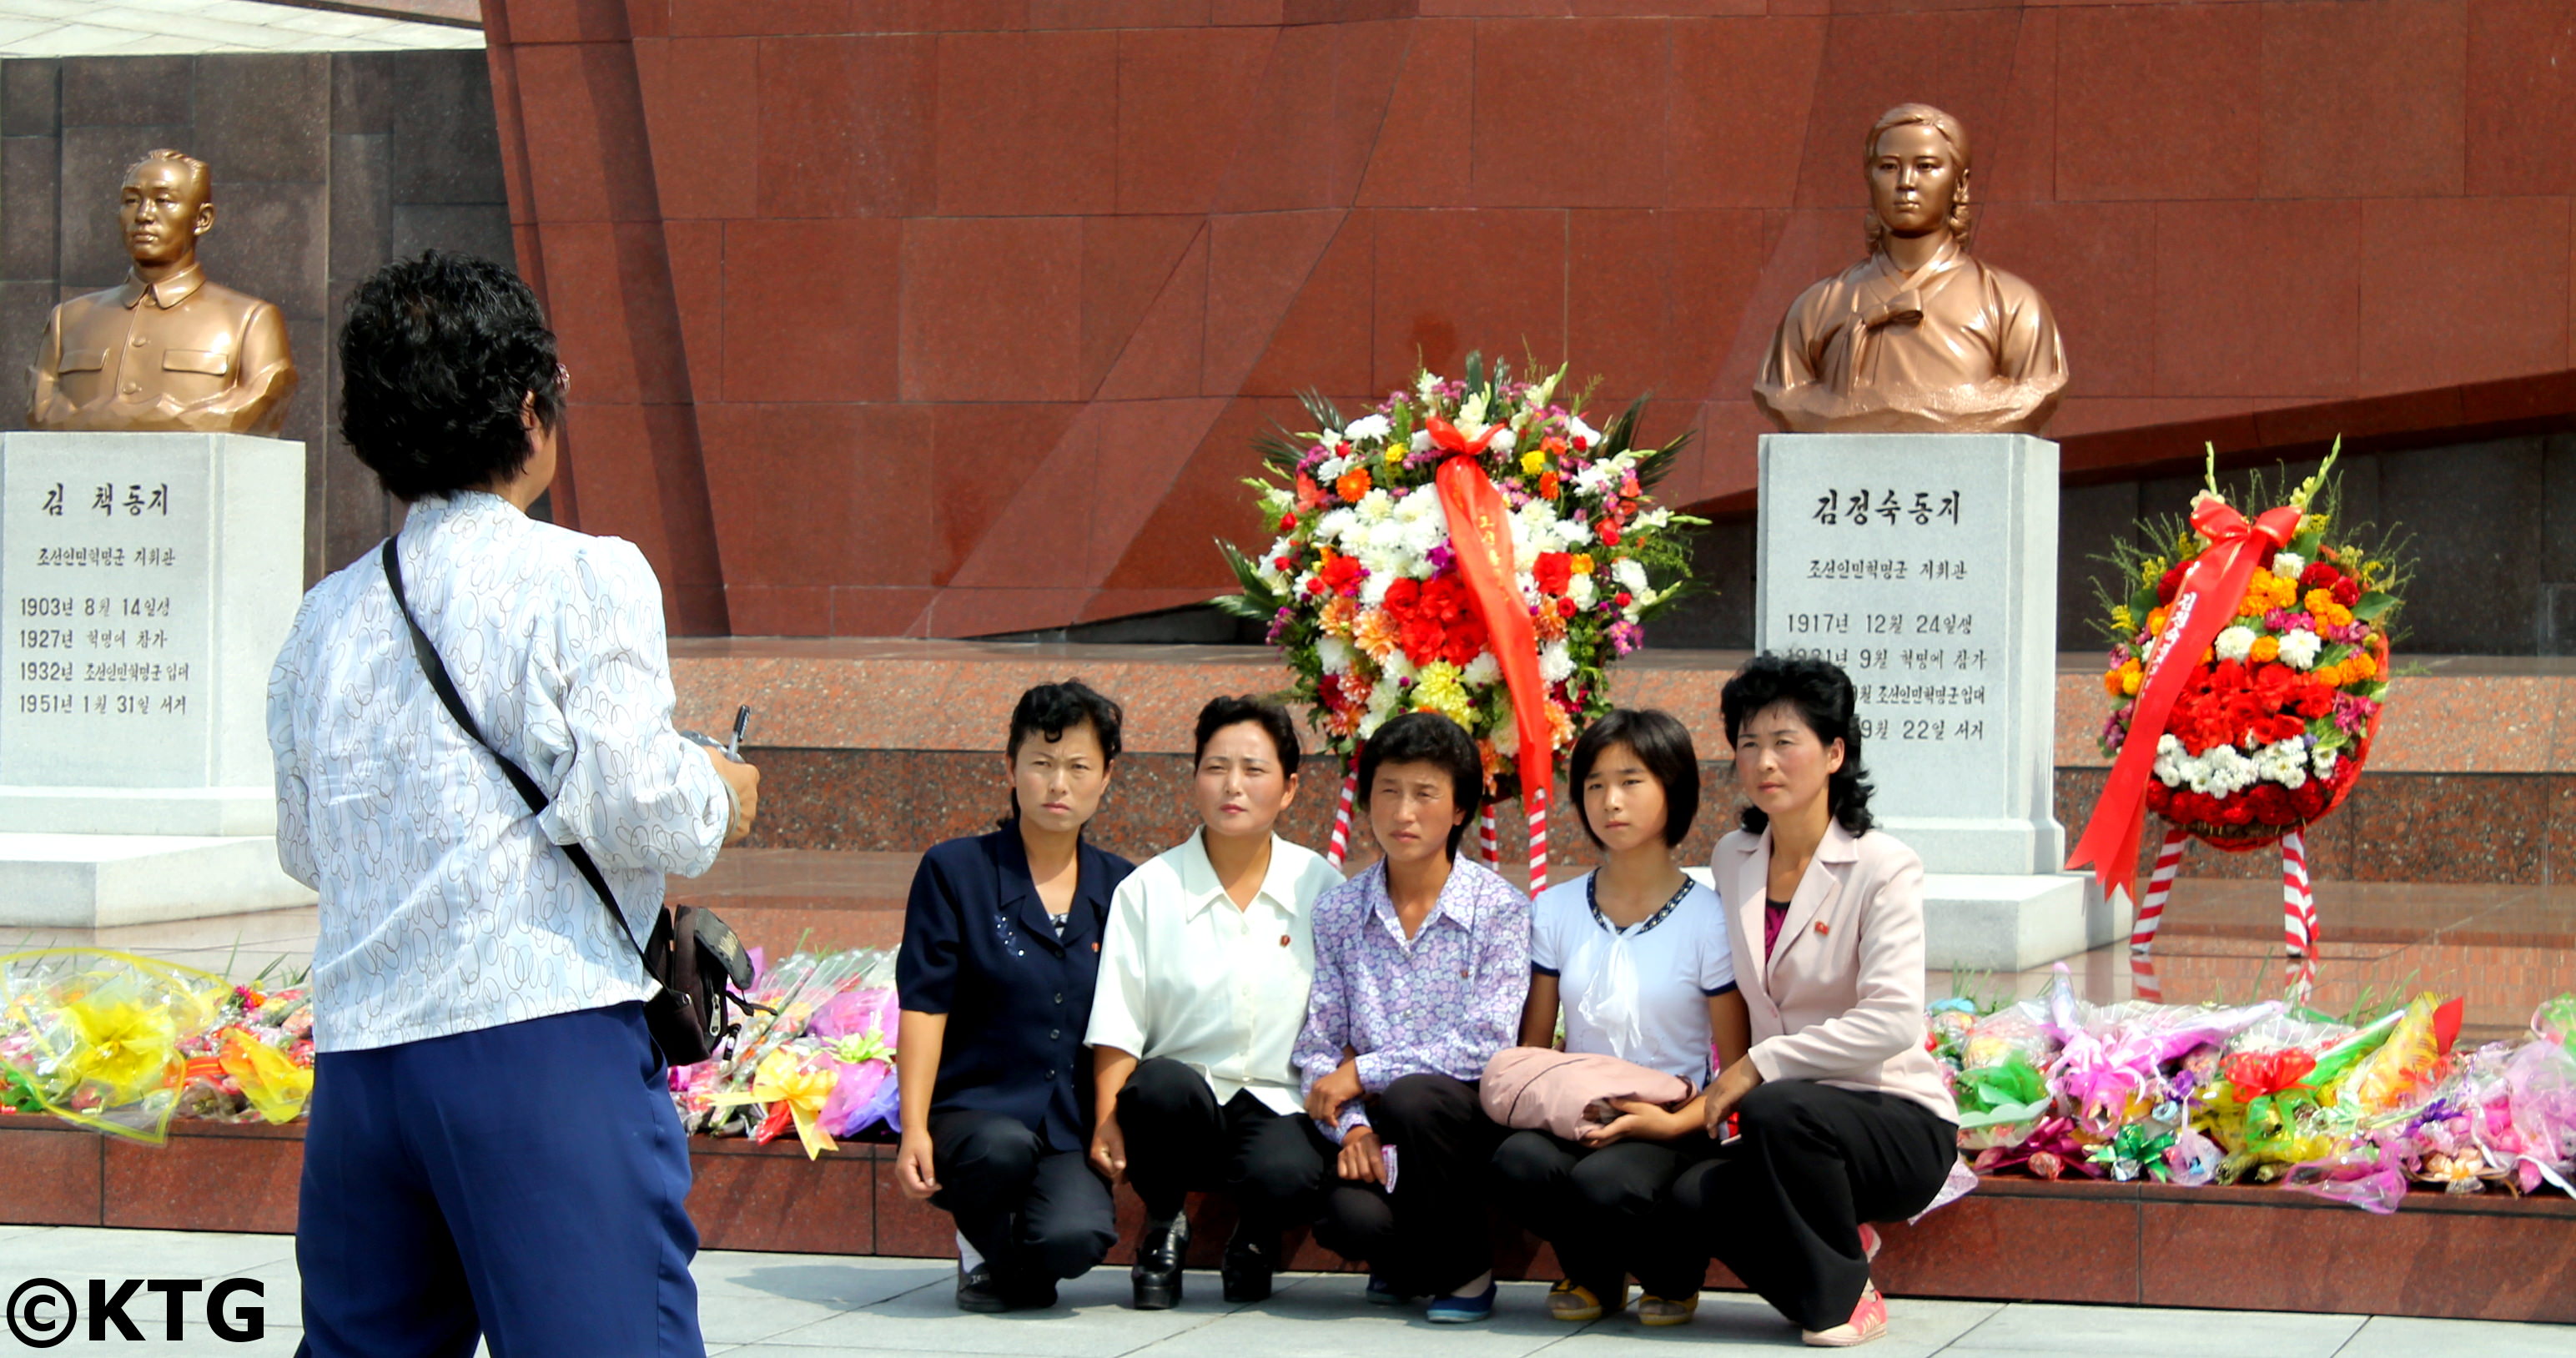 Family by the bust of Mother Kim Jong Suk at the Revolutionary Martyr's Cemetery Pyongyang, North Korea